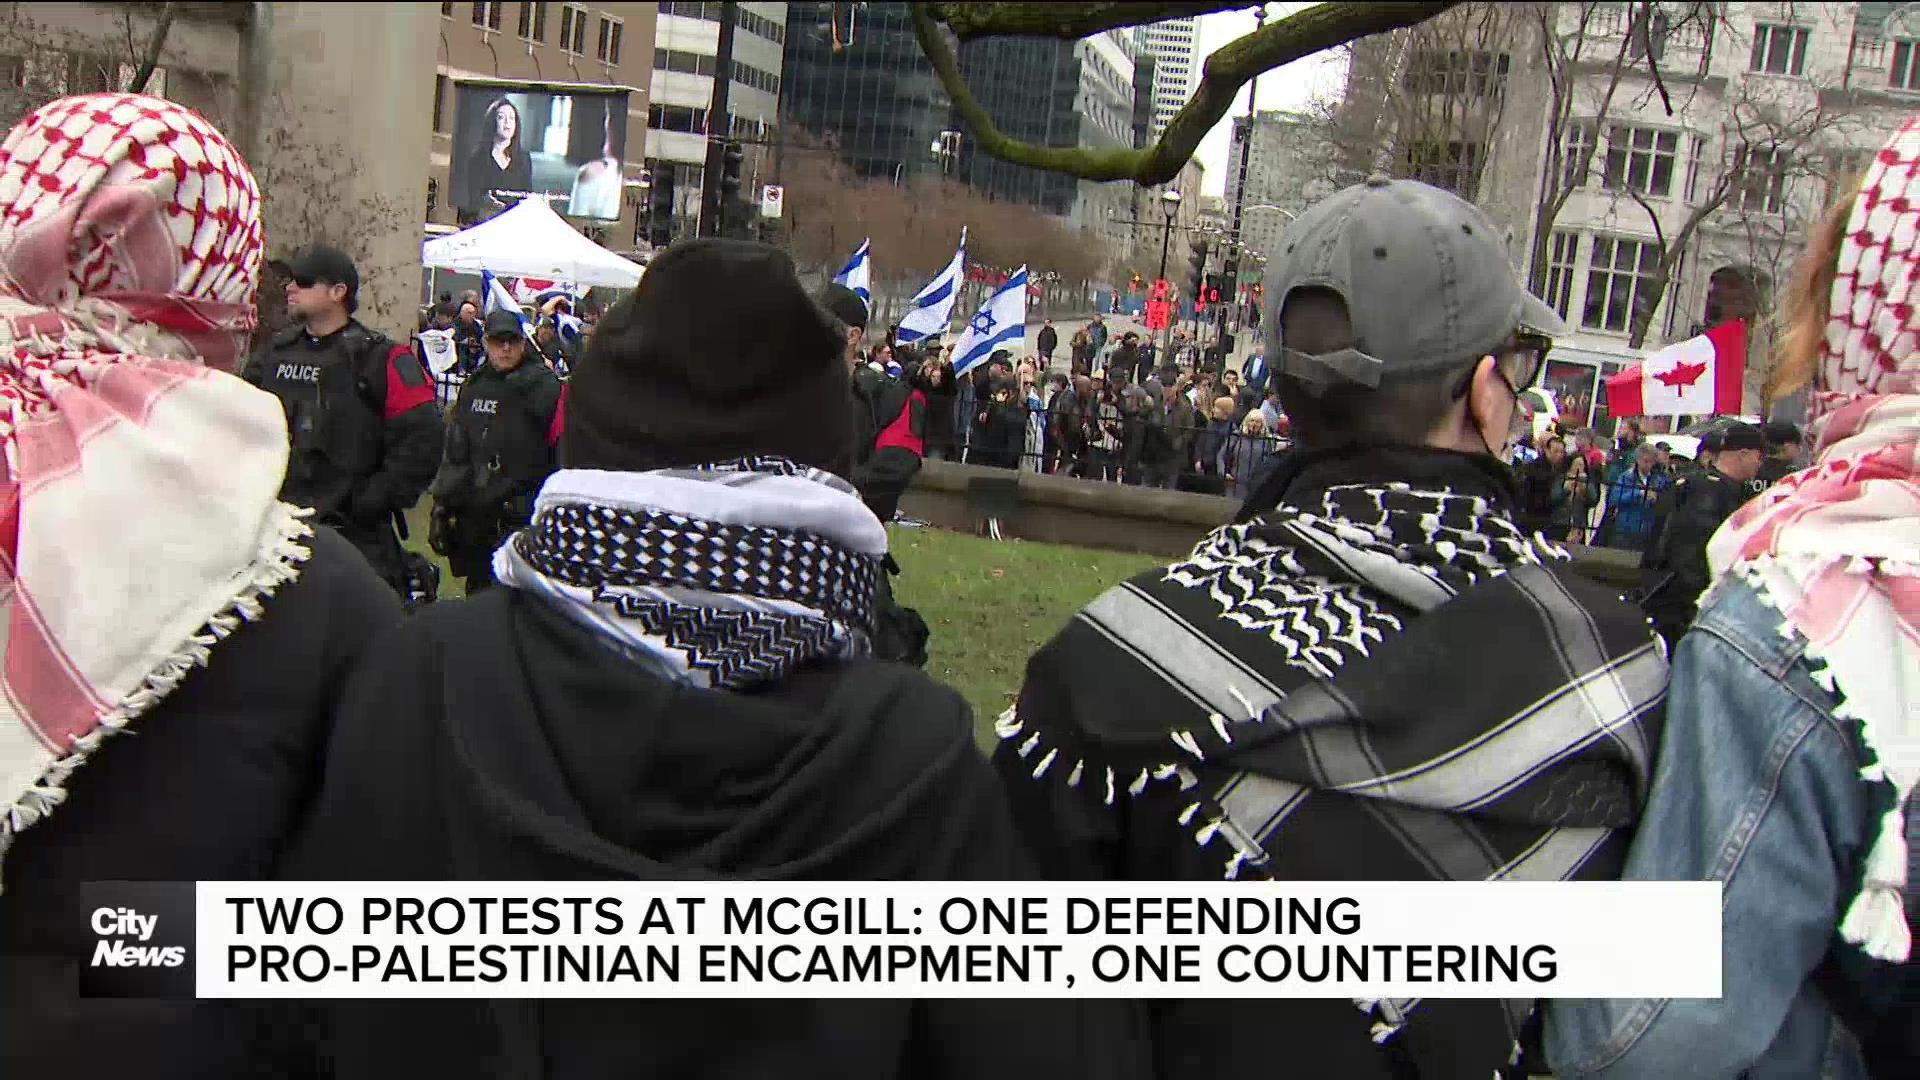 Opposing protests at Montreal's McGill amid pro-Palestinian encampment